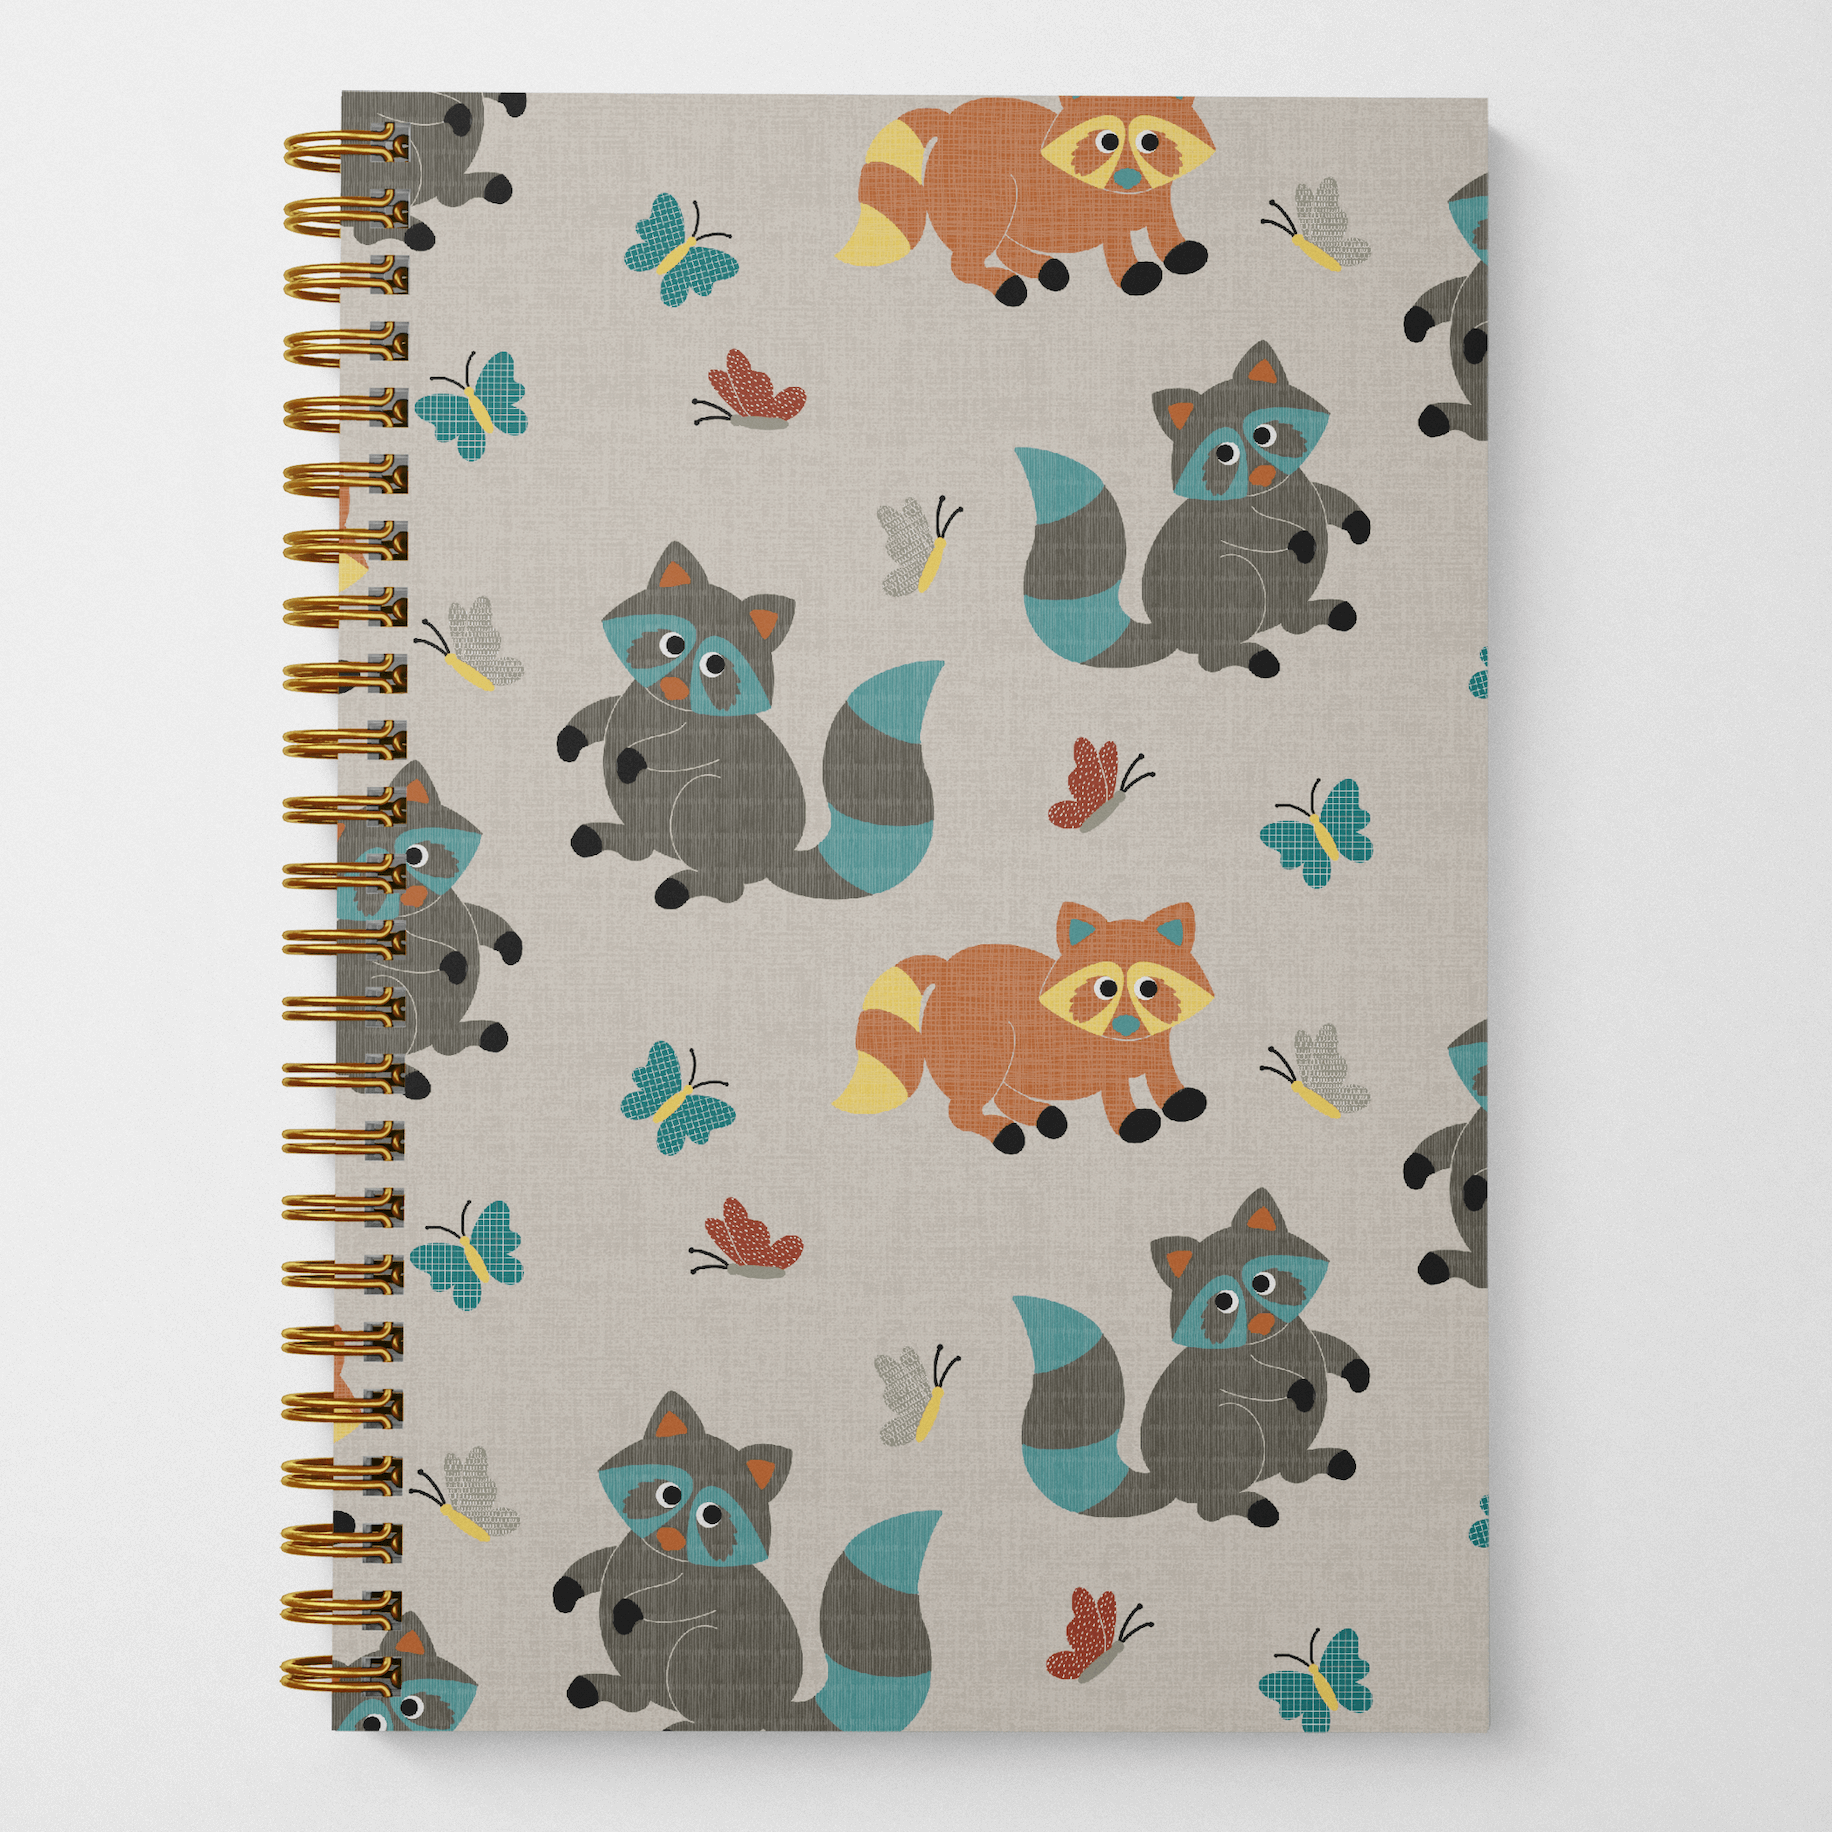 A photo of the front cover of a wire spiral-bound 8.5" x 5.5" wire spiral-bound notebook with 60 lined pages featuring cute brown and grey raccoons playing with colorful butterflies in a tossed pattern on a gray background.